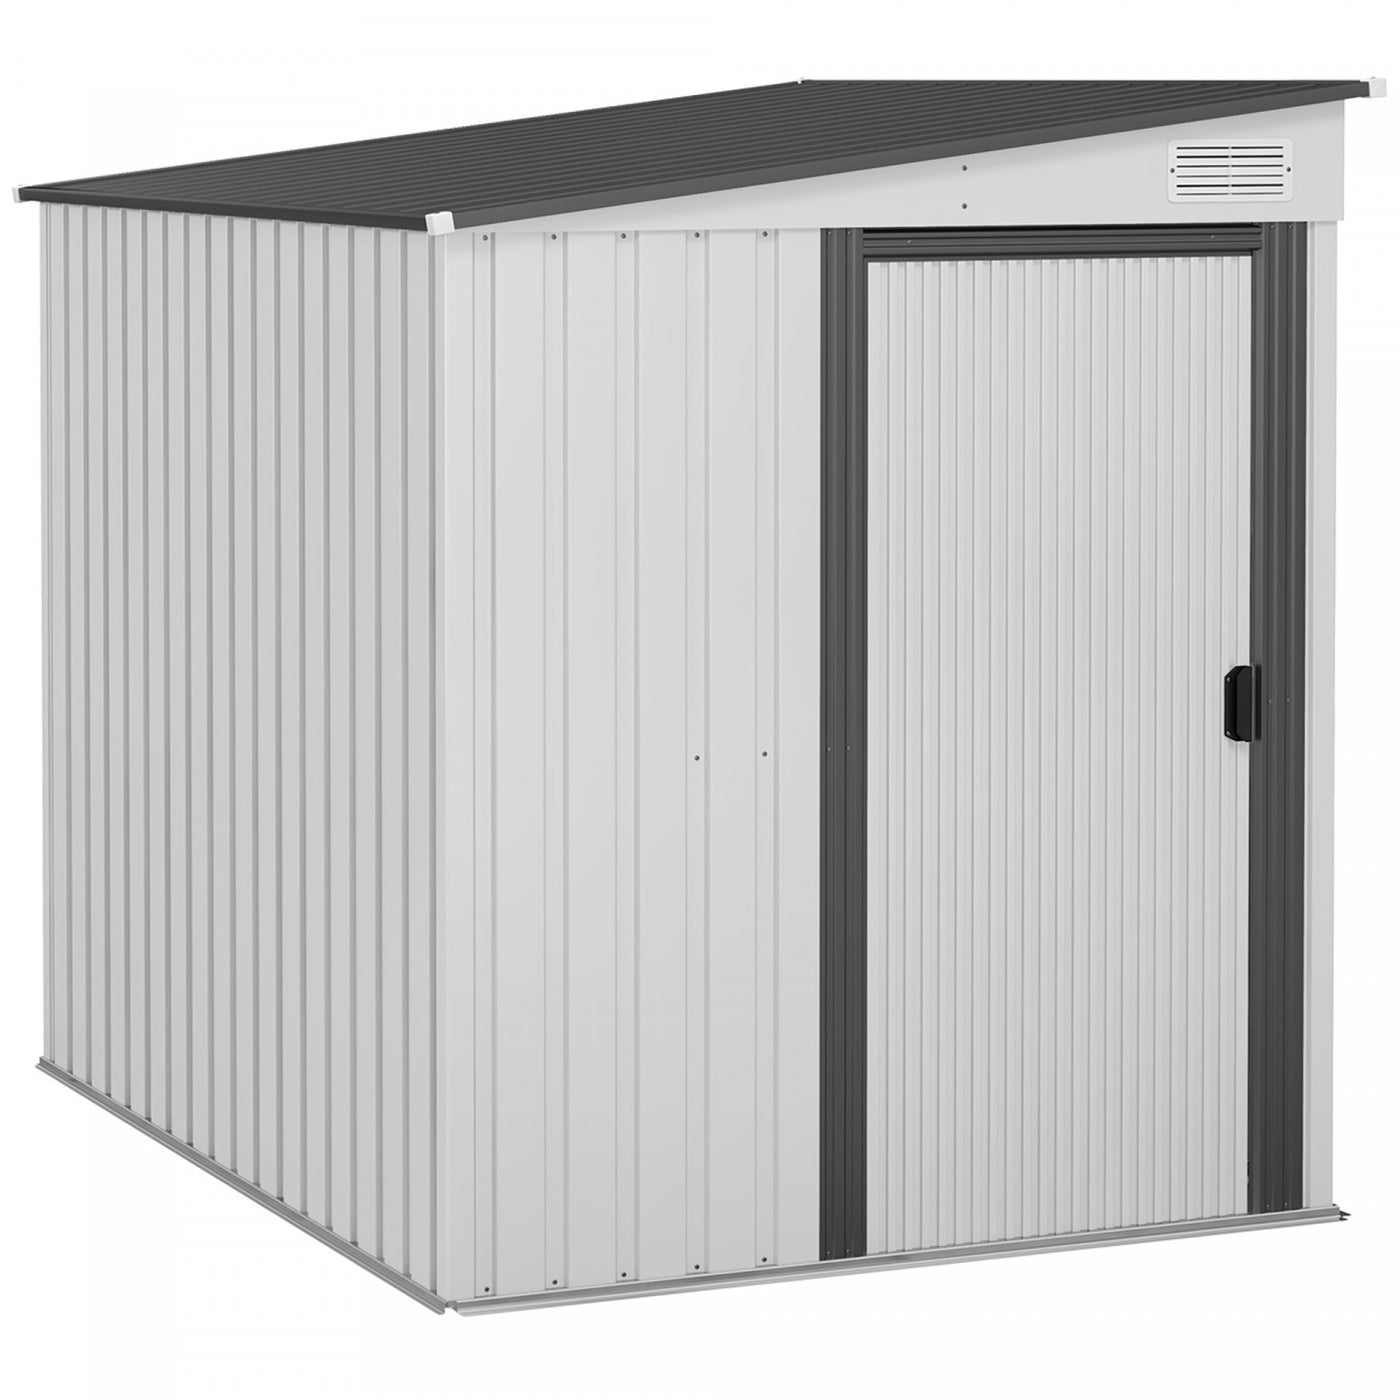 Outsunny 5 X 7ft Lean To Outdoor Storage Shed With Floor Foundation